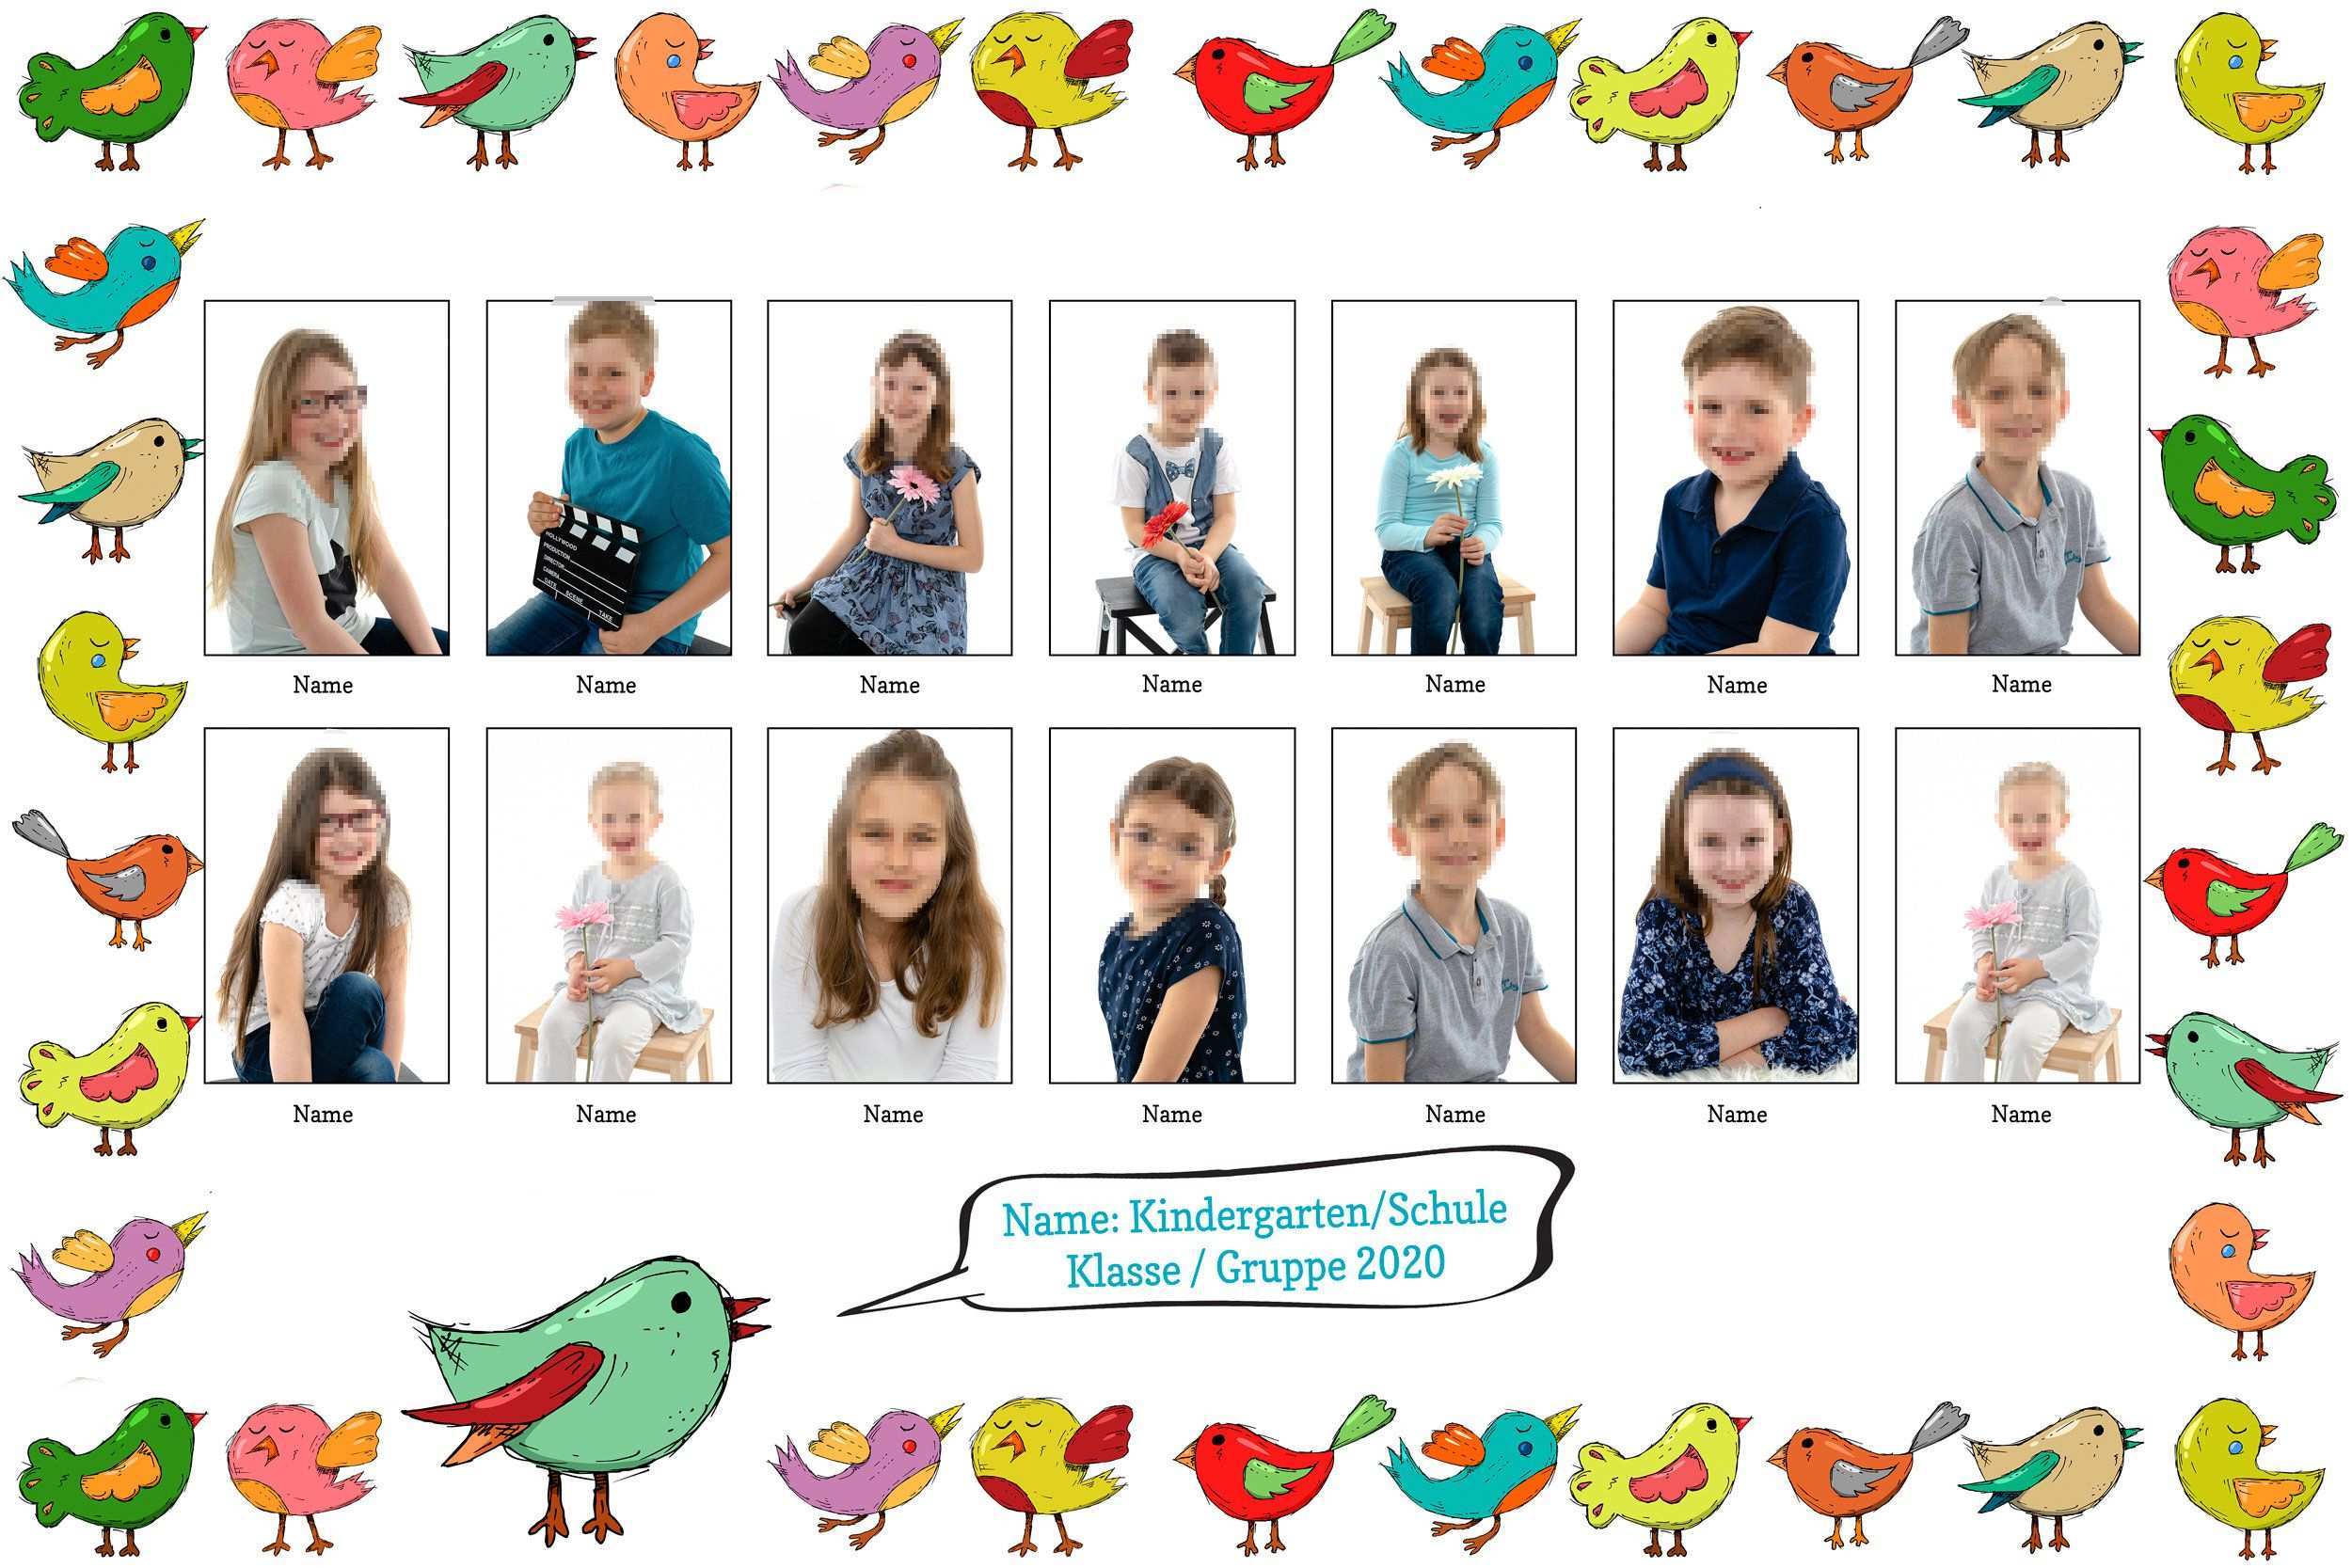 Custom Class Photo Collage Template School Class Kindergarten Group Photo Photo Collage Classroom Photographer Up To 27 People Photo Collage Template Photo Collage Collage Template